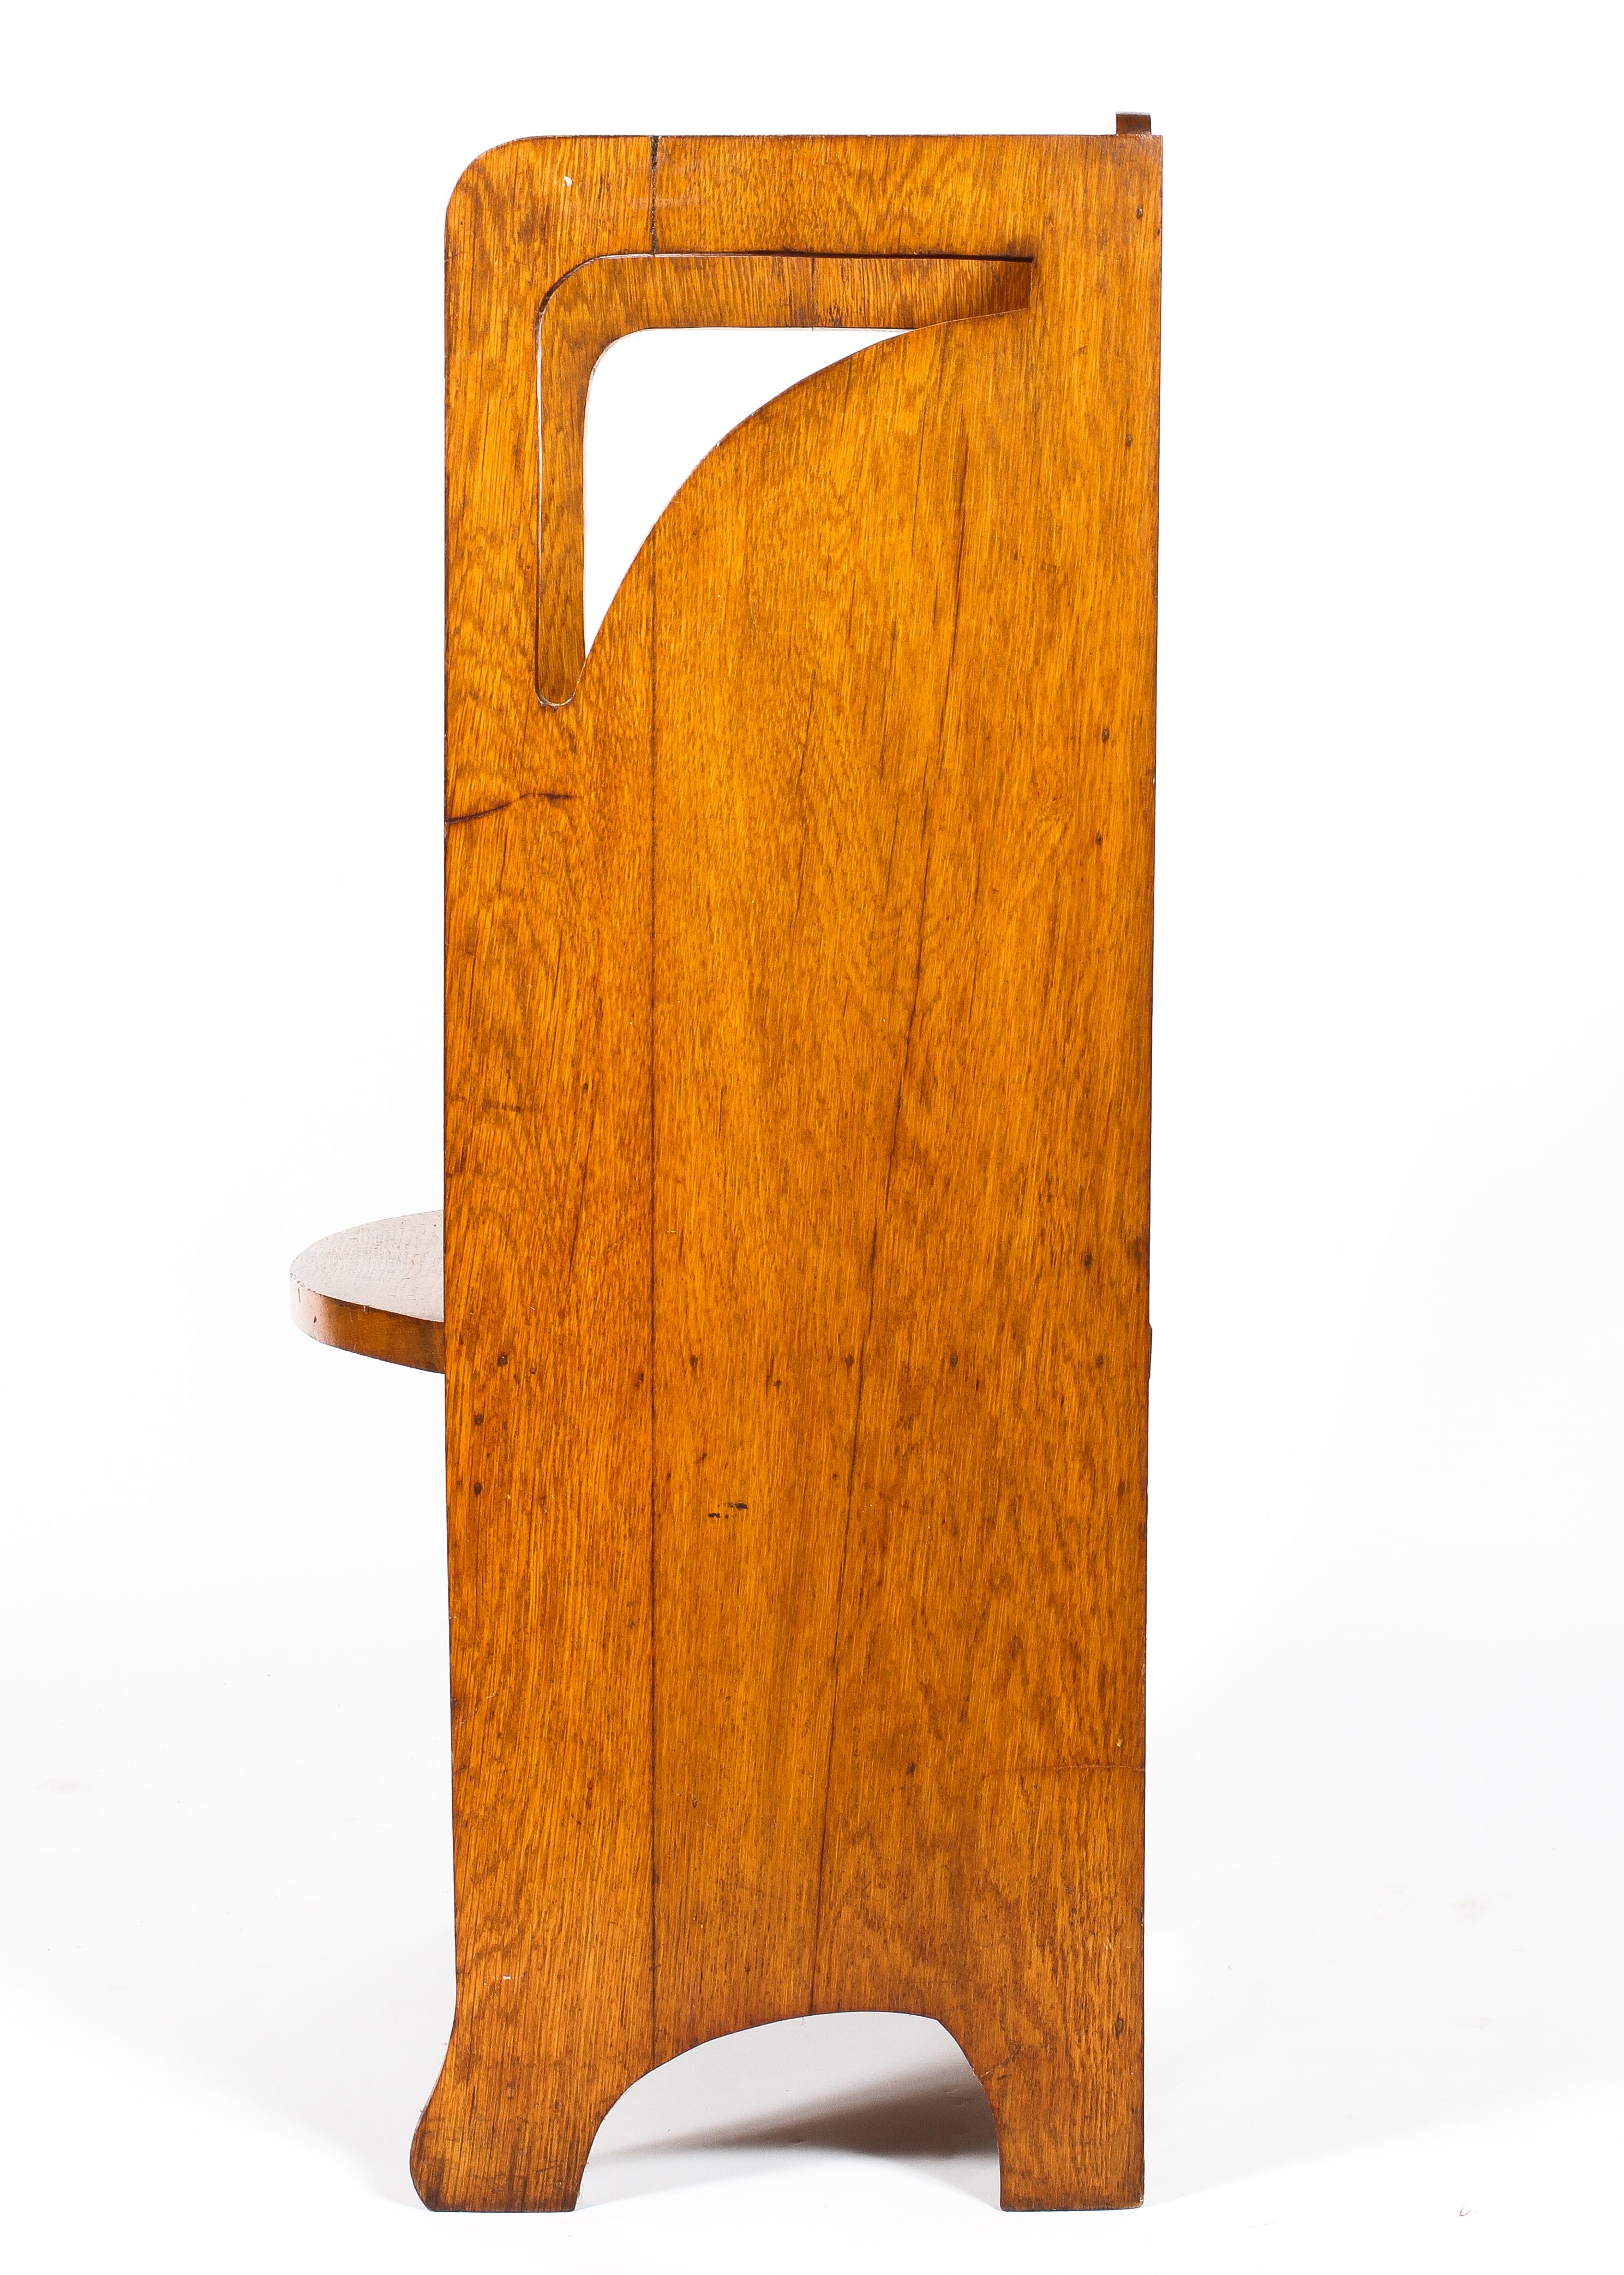 An Arts and Crafts oak chair, attributed to Wylie & Lochhead (Glasgow), circa 1900, - Image 2 of 9